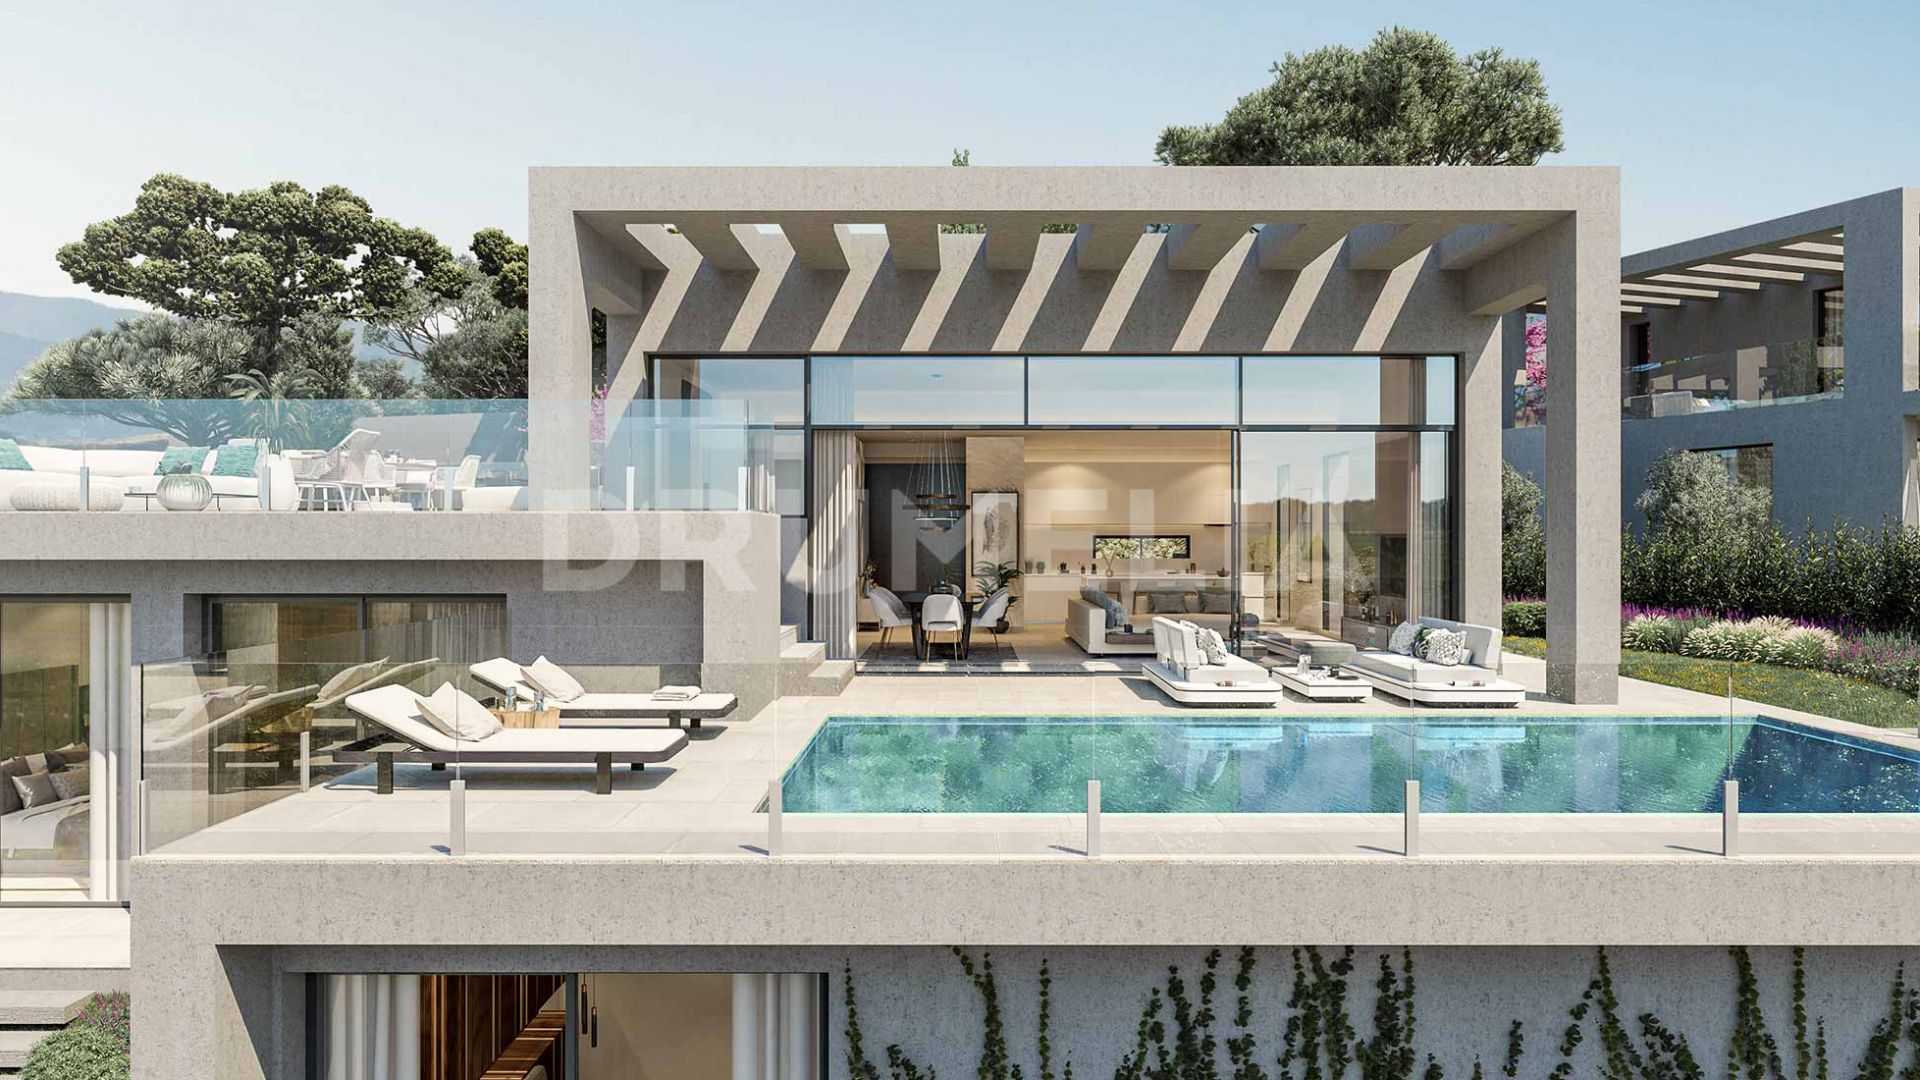 Brand-New Luxury House with Views and Modern Aesthetic in Benahavis (project)